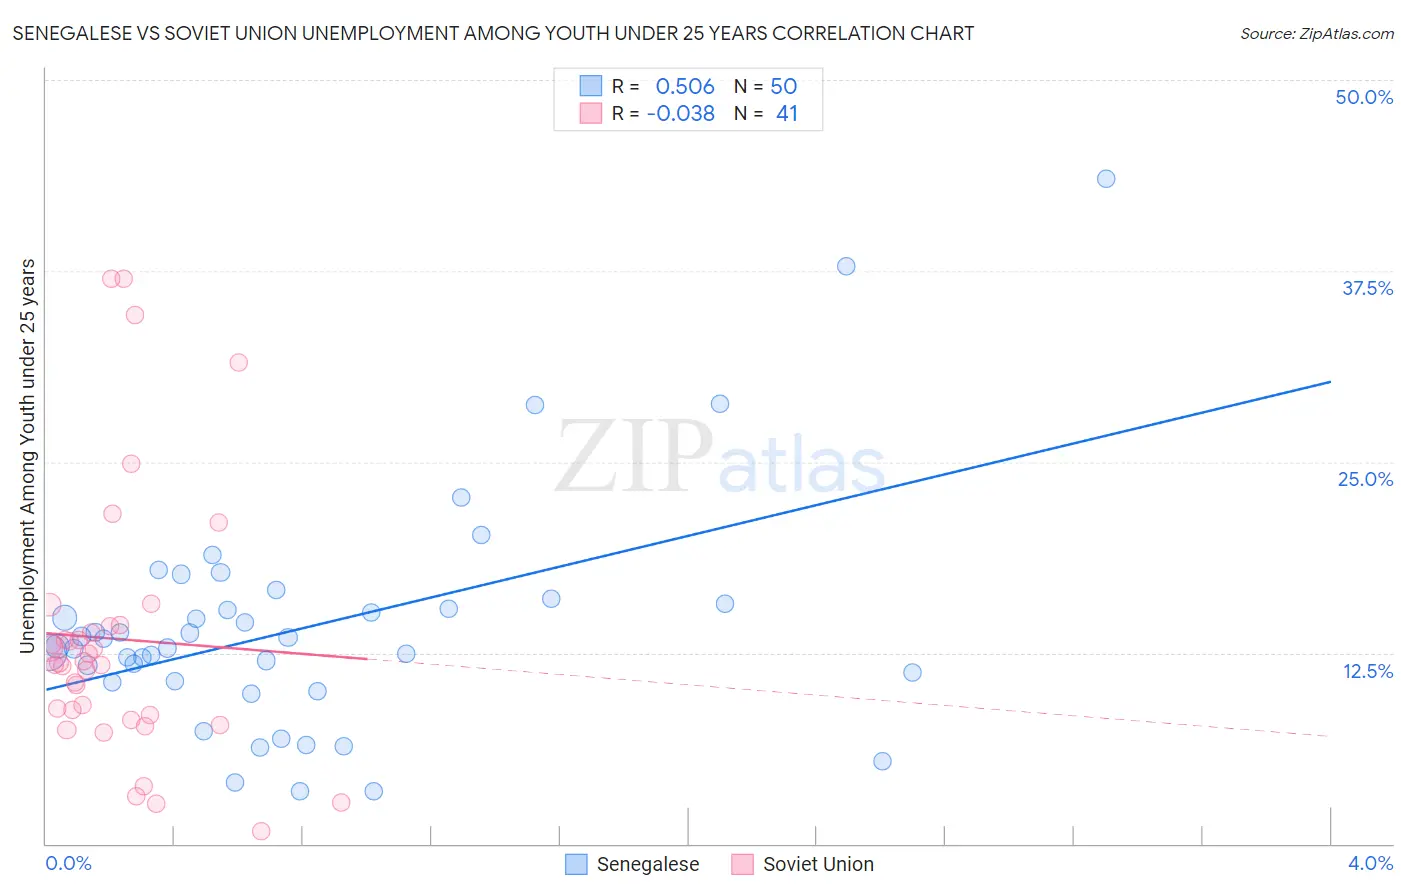 Senegalese vs Soviet Union Unemployment Among Youth under 25 years